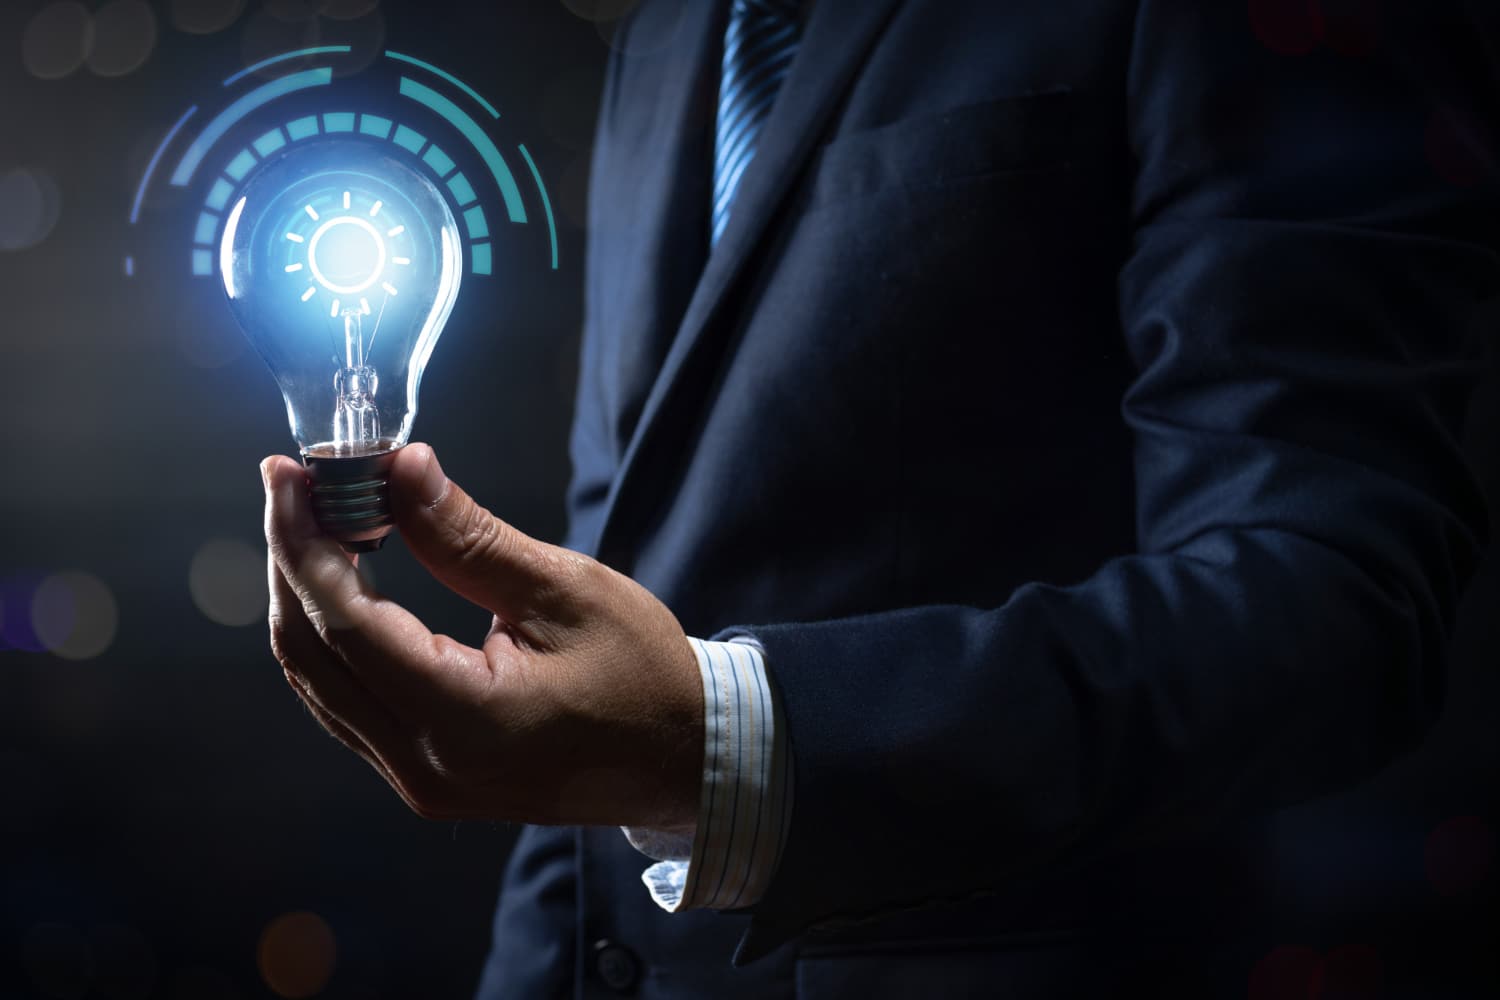 innovation-and-energy-of-creative-thinking-businessman-holding-light-light-bulb-glowing-and-lighting-with-connection